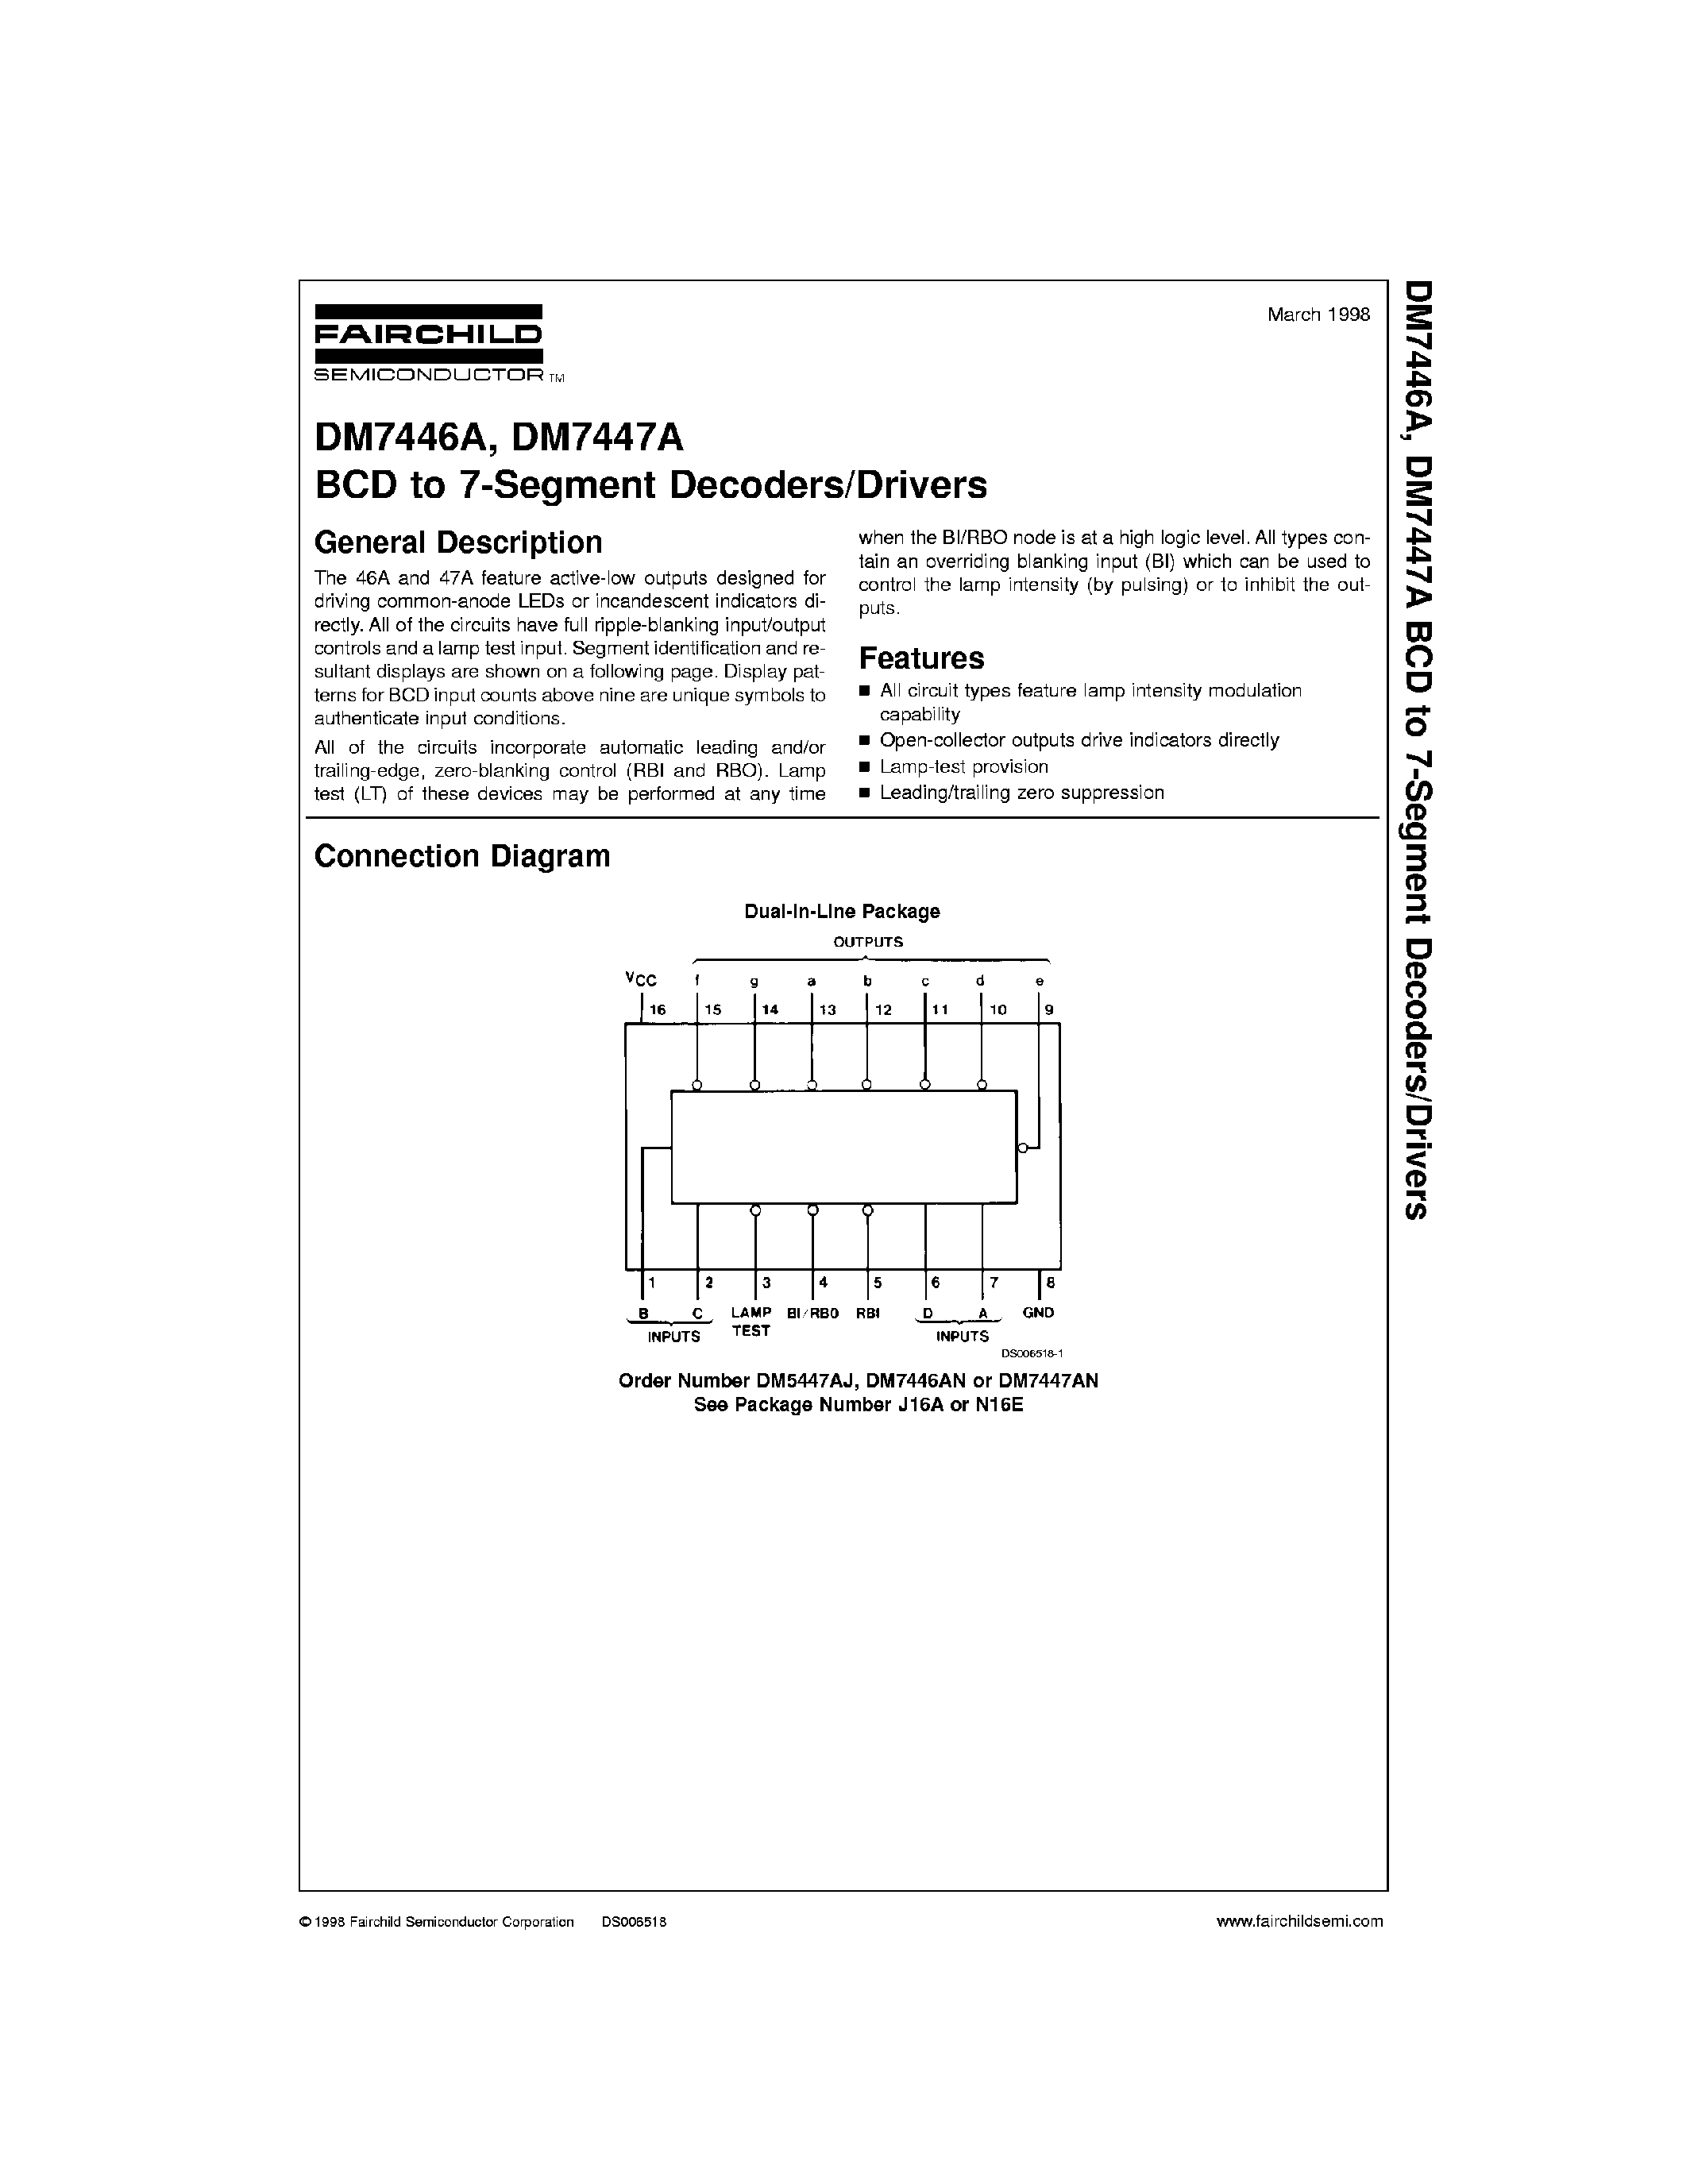 Datasheet 7447 - BCD to 7-Segment Decoders/Drivers page 1